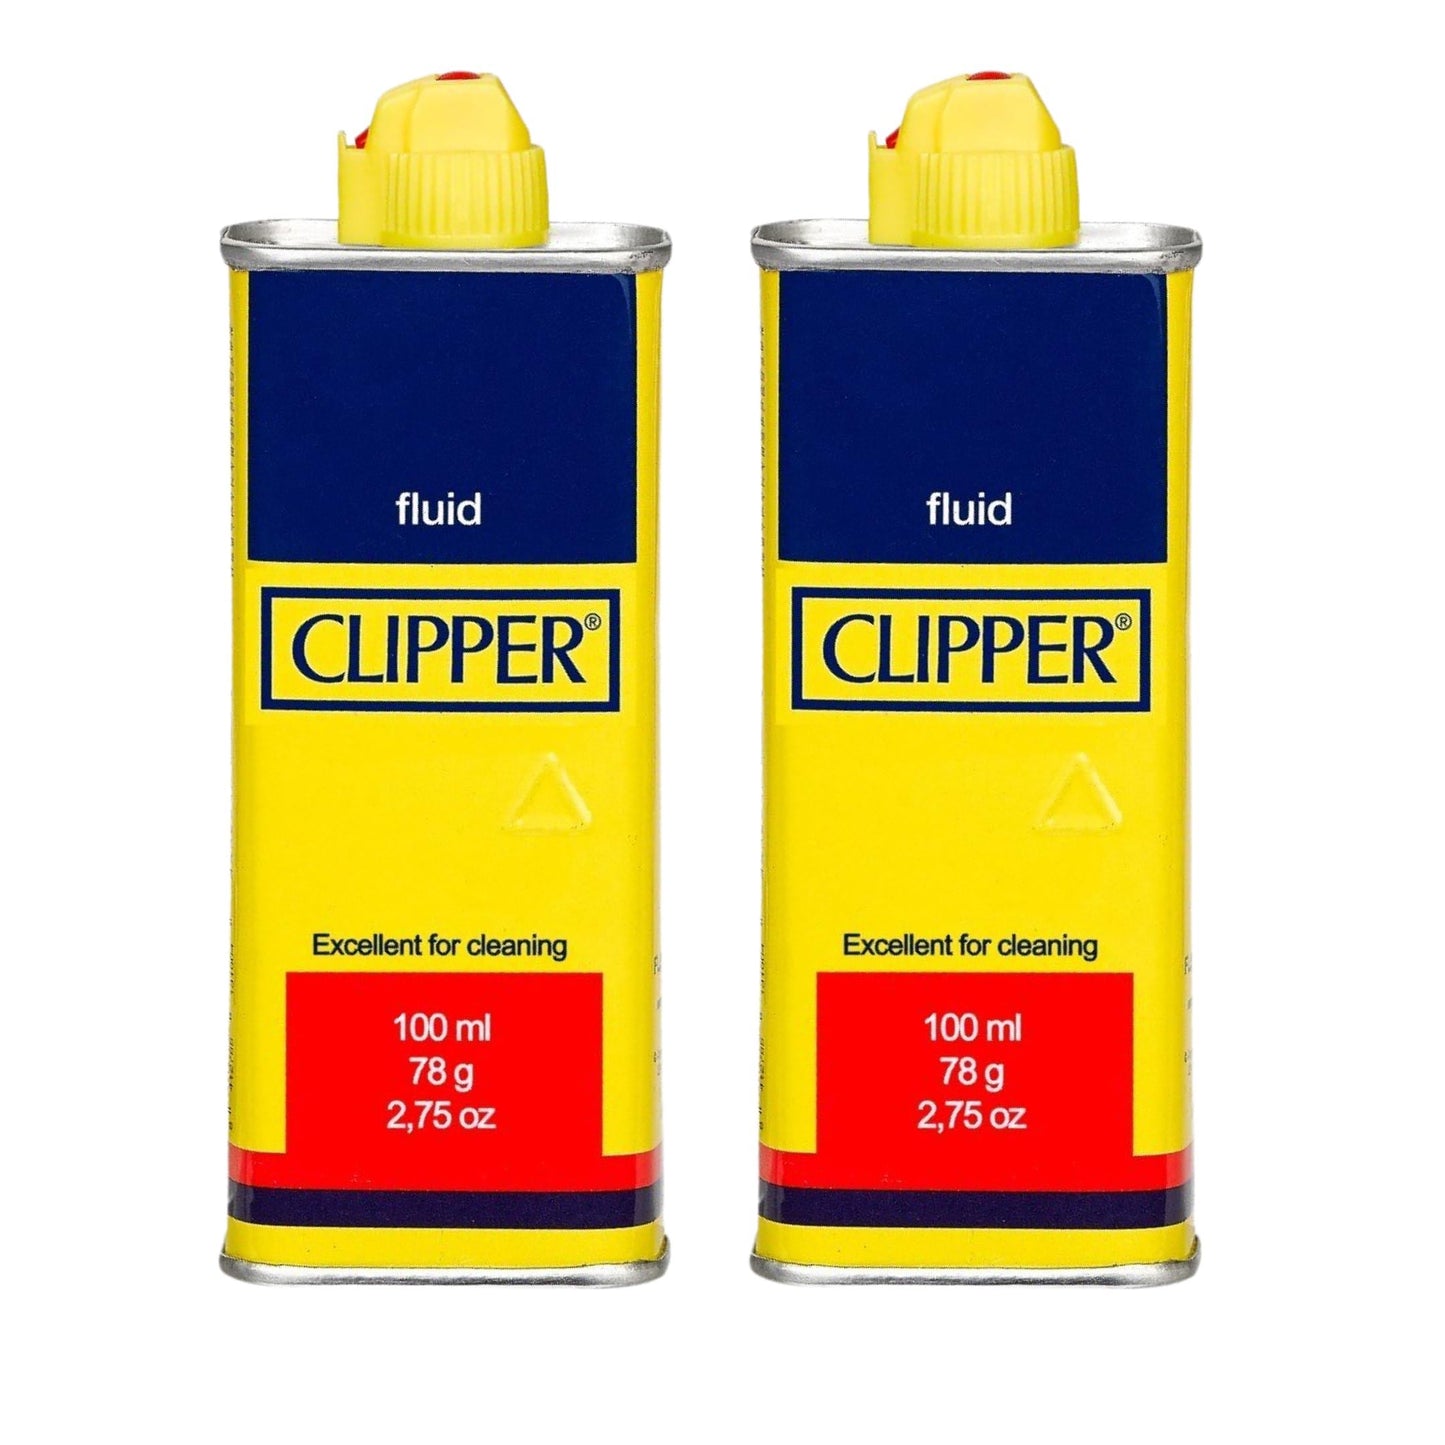 2 x Clipper 100ml Lighter Fluid - Long-Lasting, Clean Burning Fuel for Everyday Use